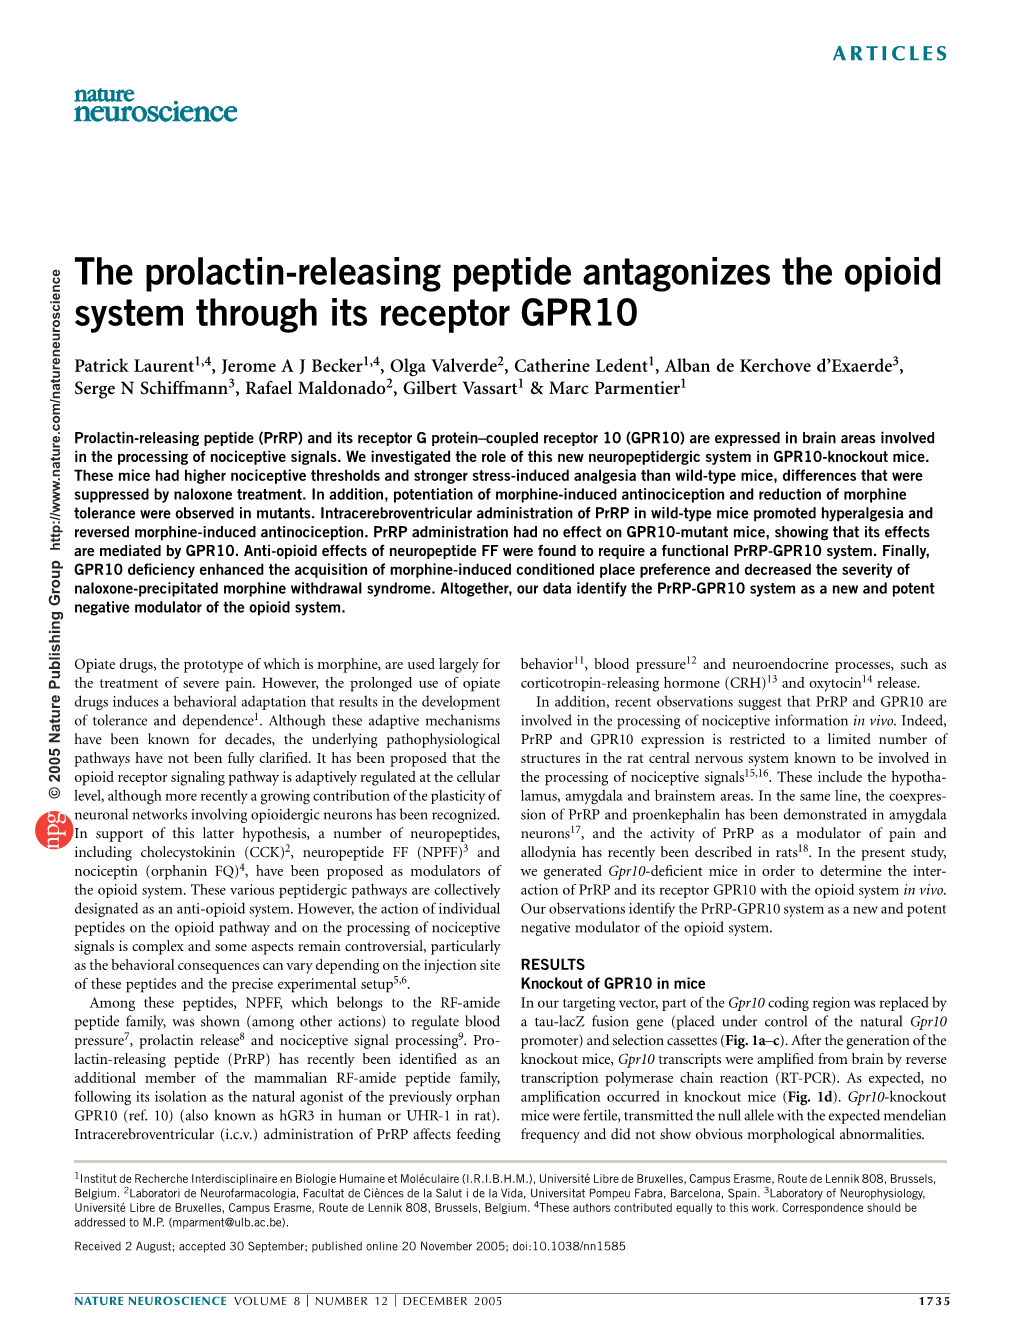 The Prolactin-Releasing Peptide Antagonizes the Opioid System Through Its Receptor GPR10